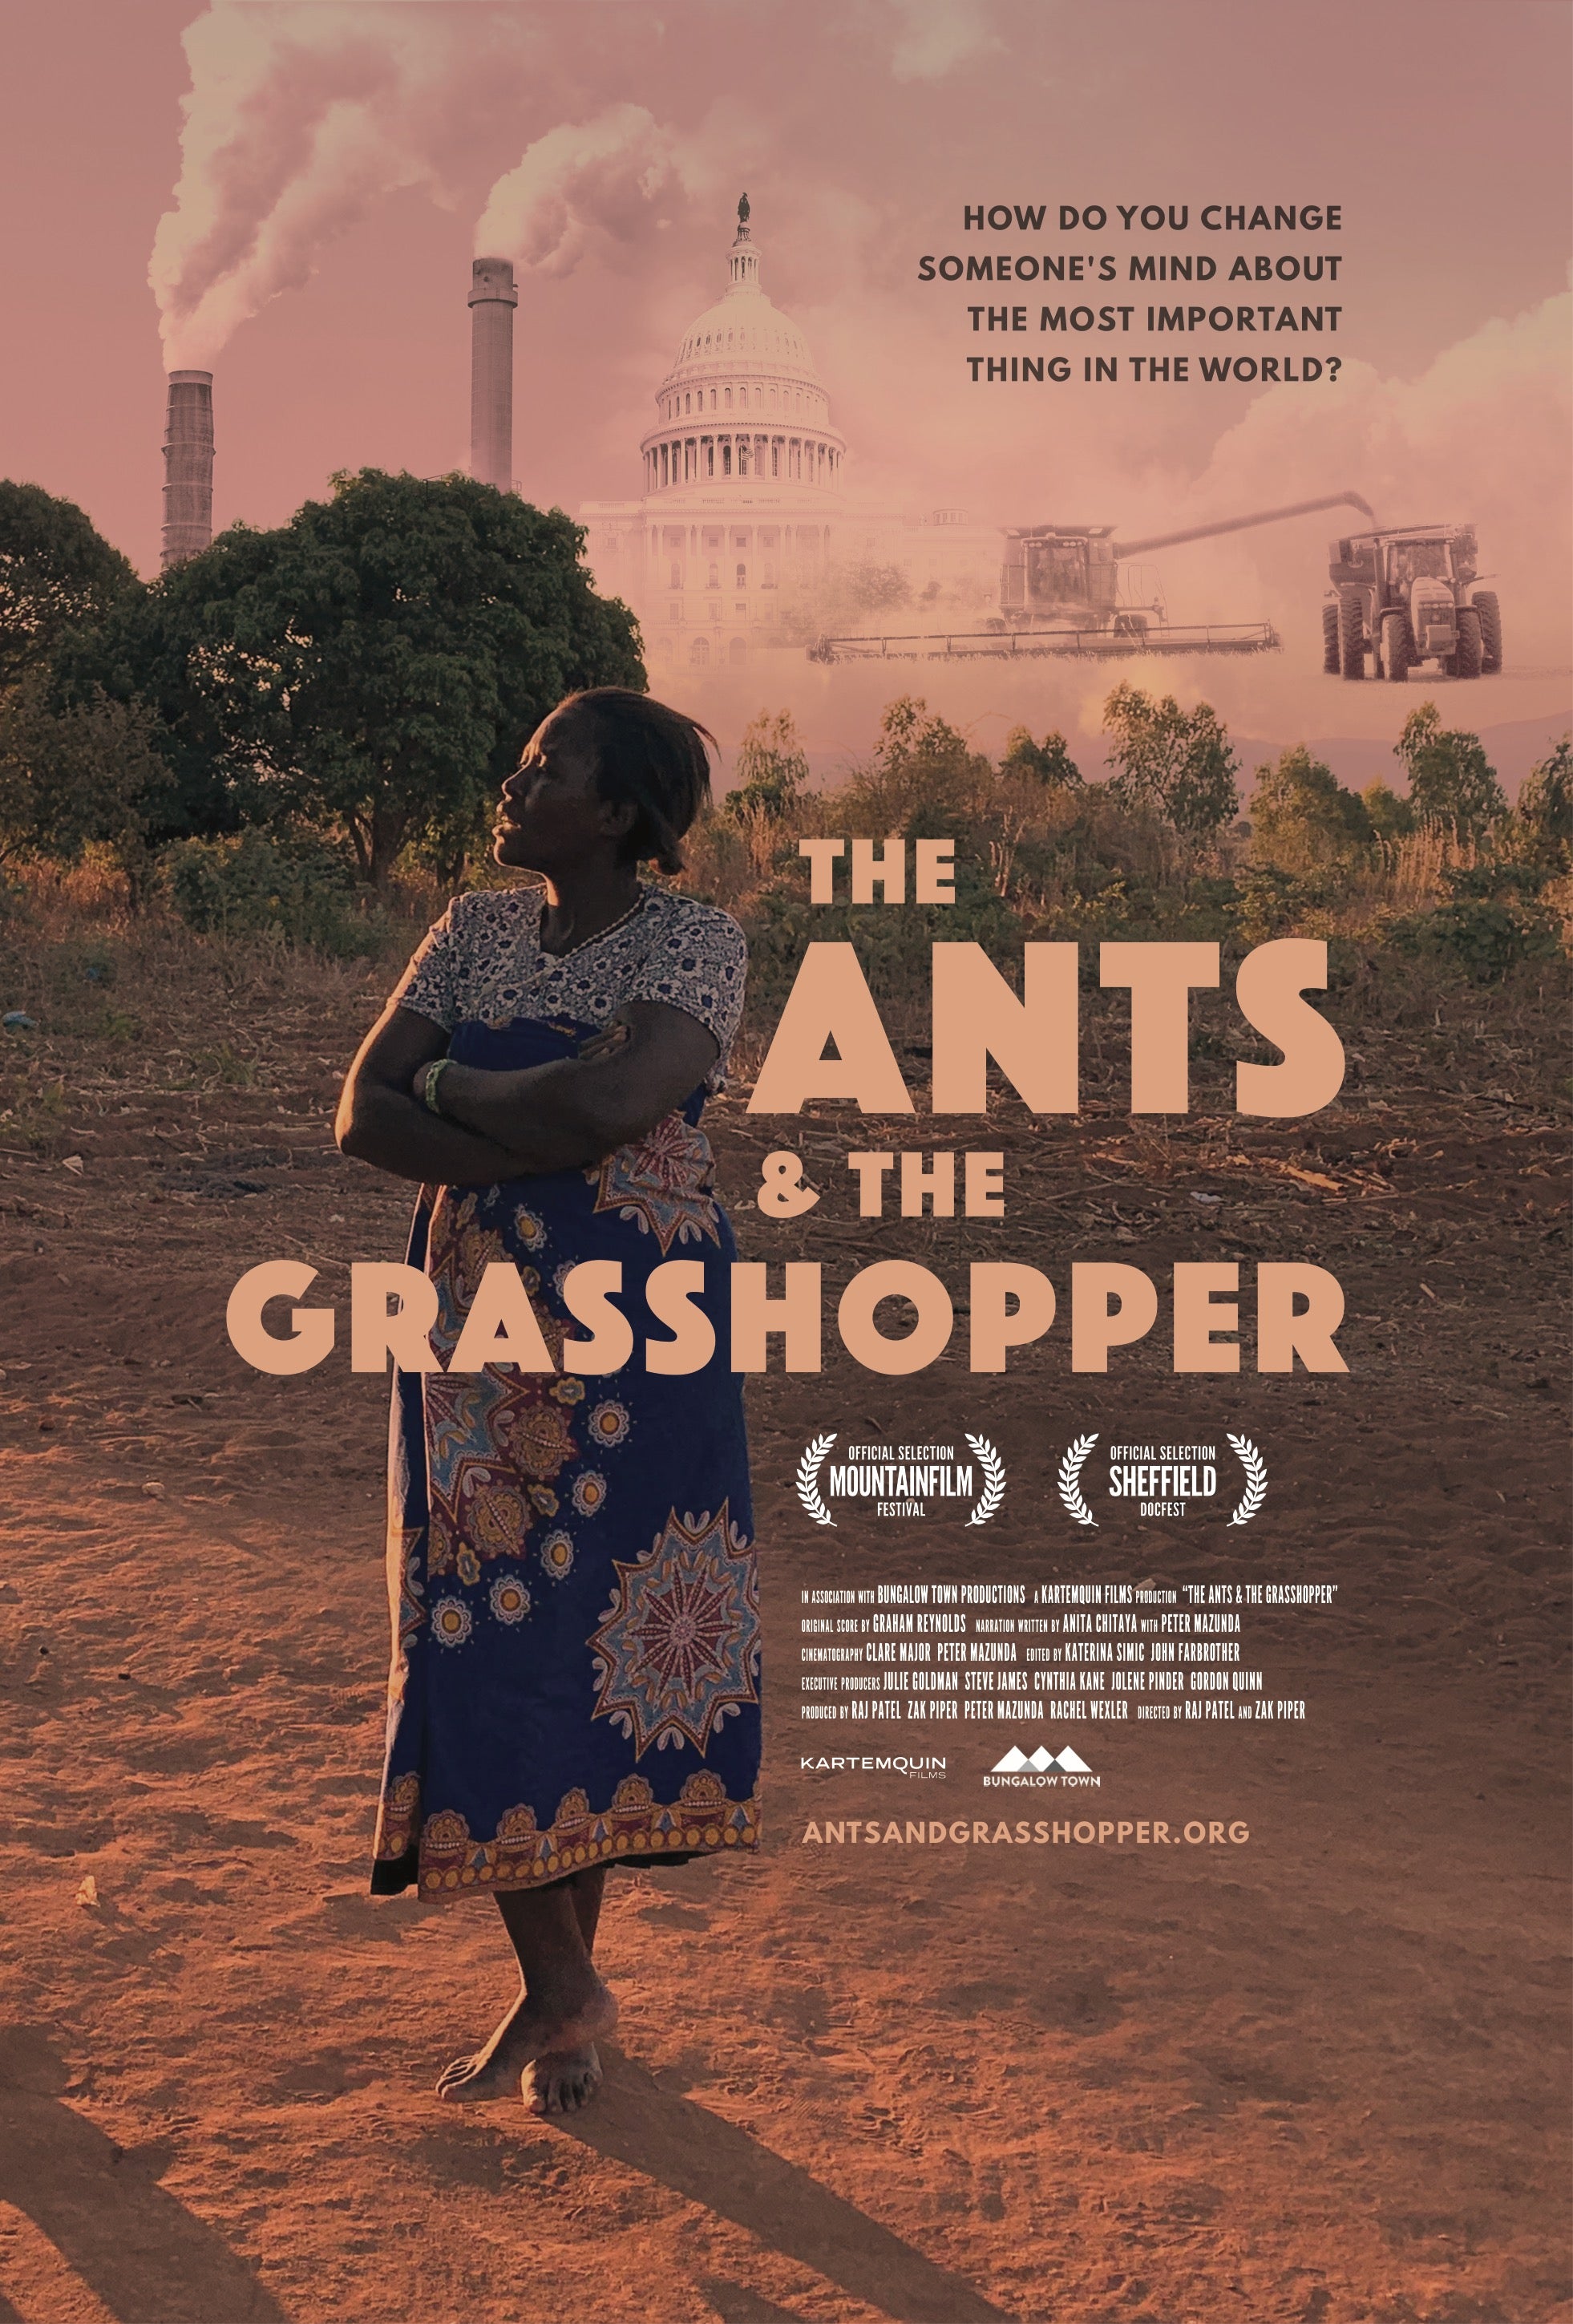 The Ants and the Grasshoppers